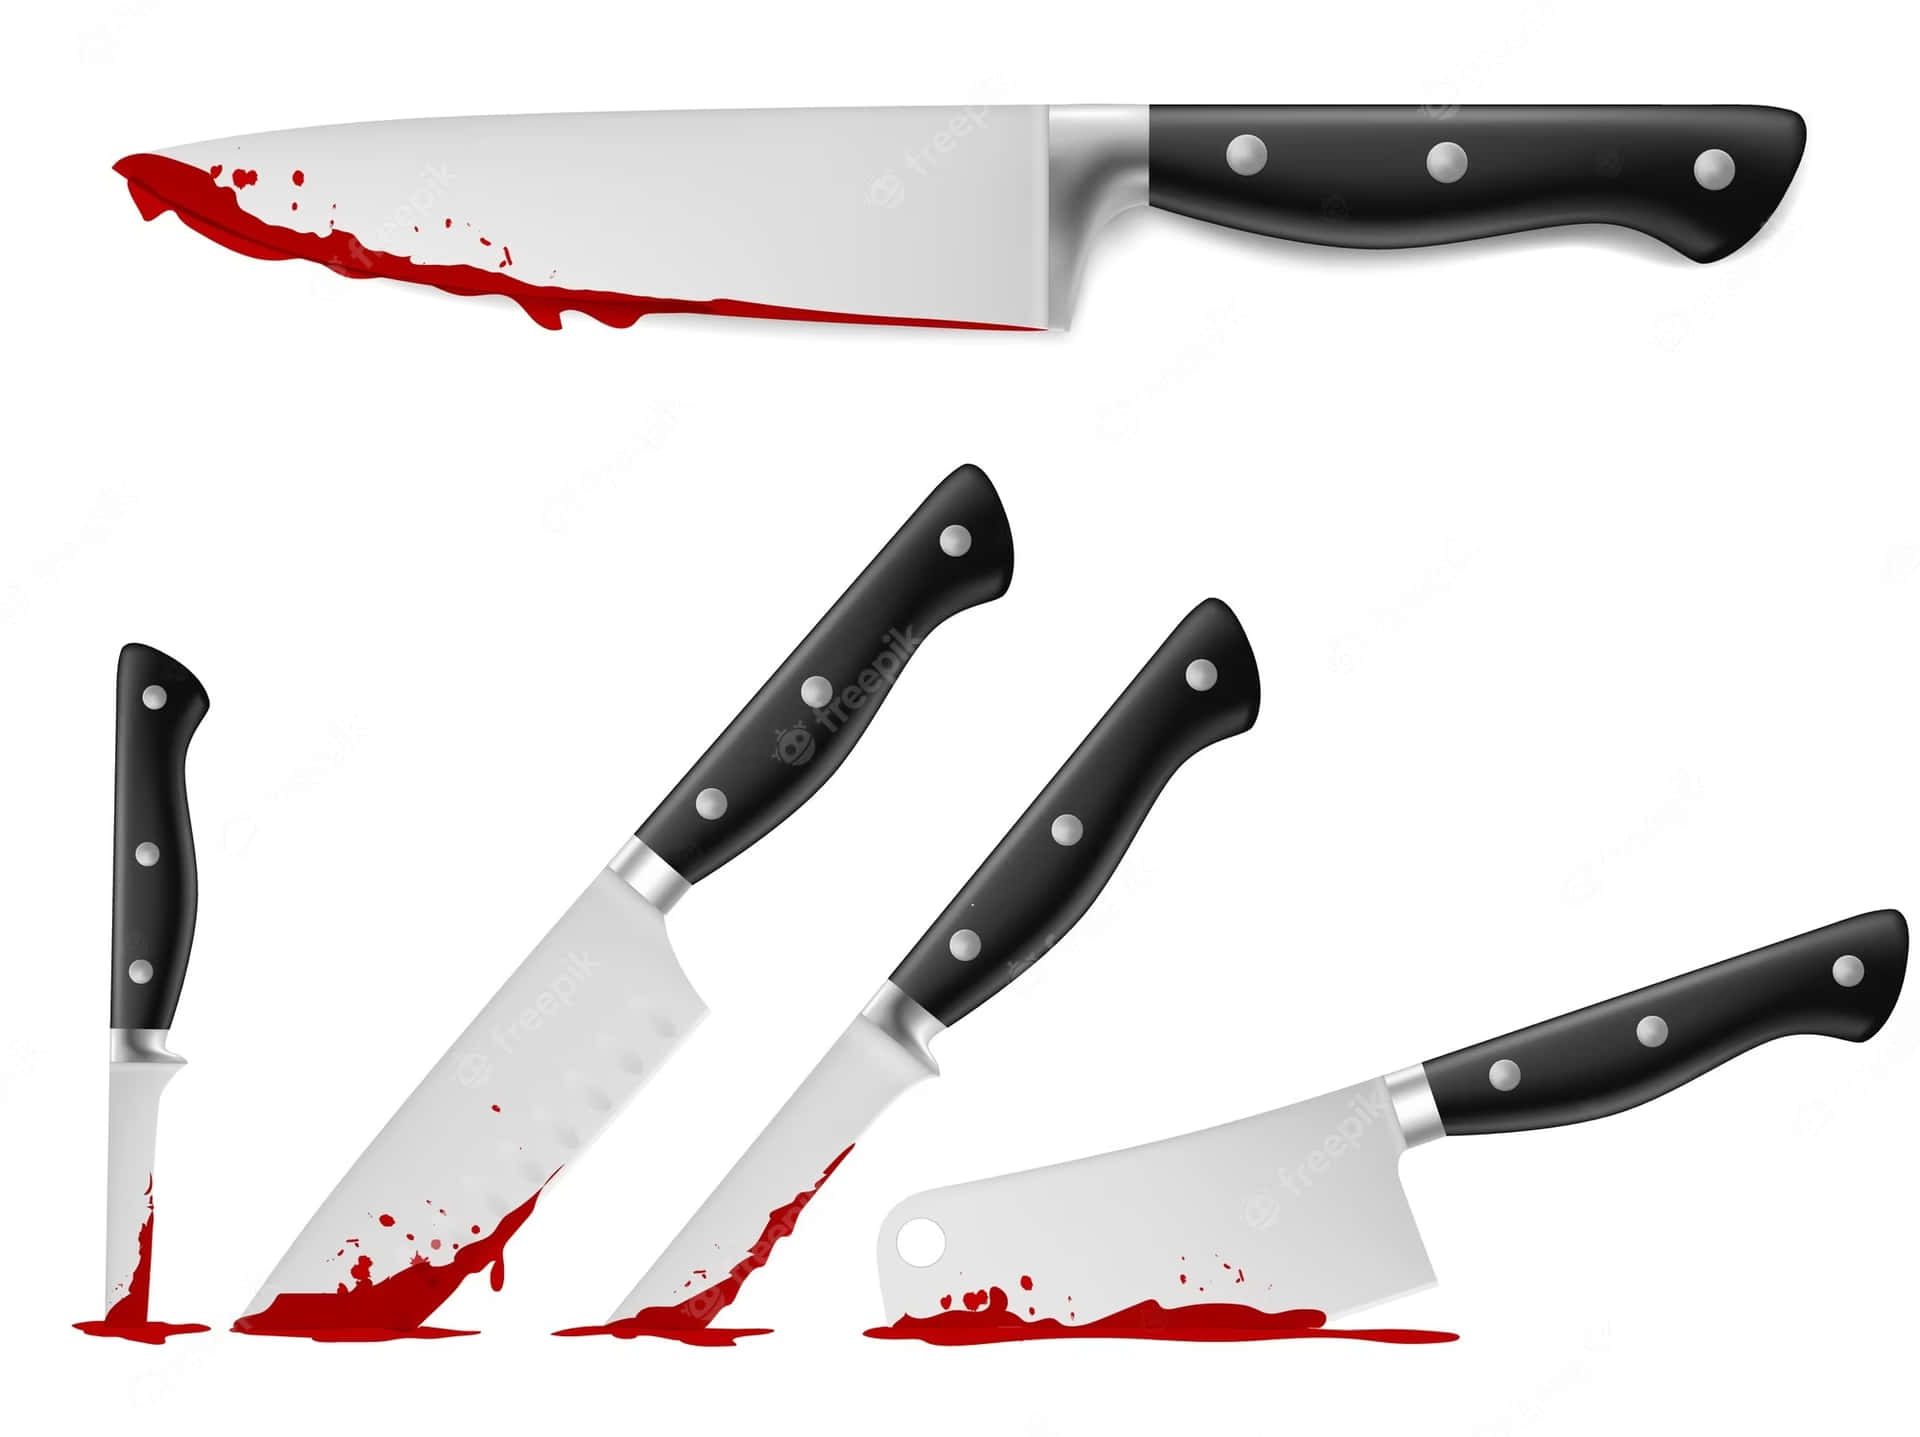 Four Knives With Blood Splatters On Them